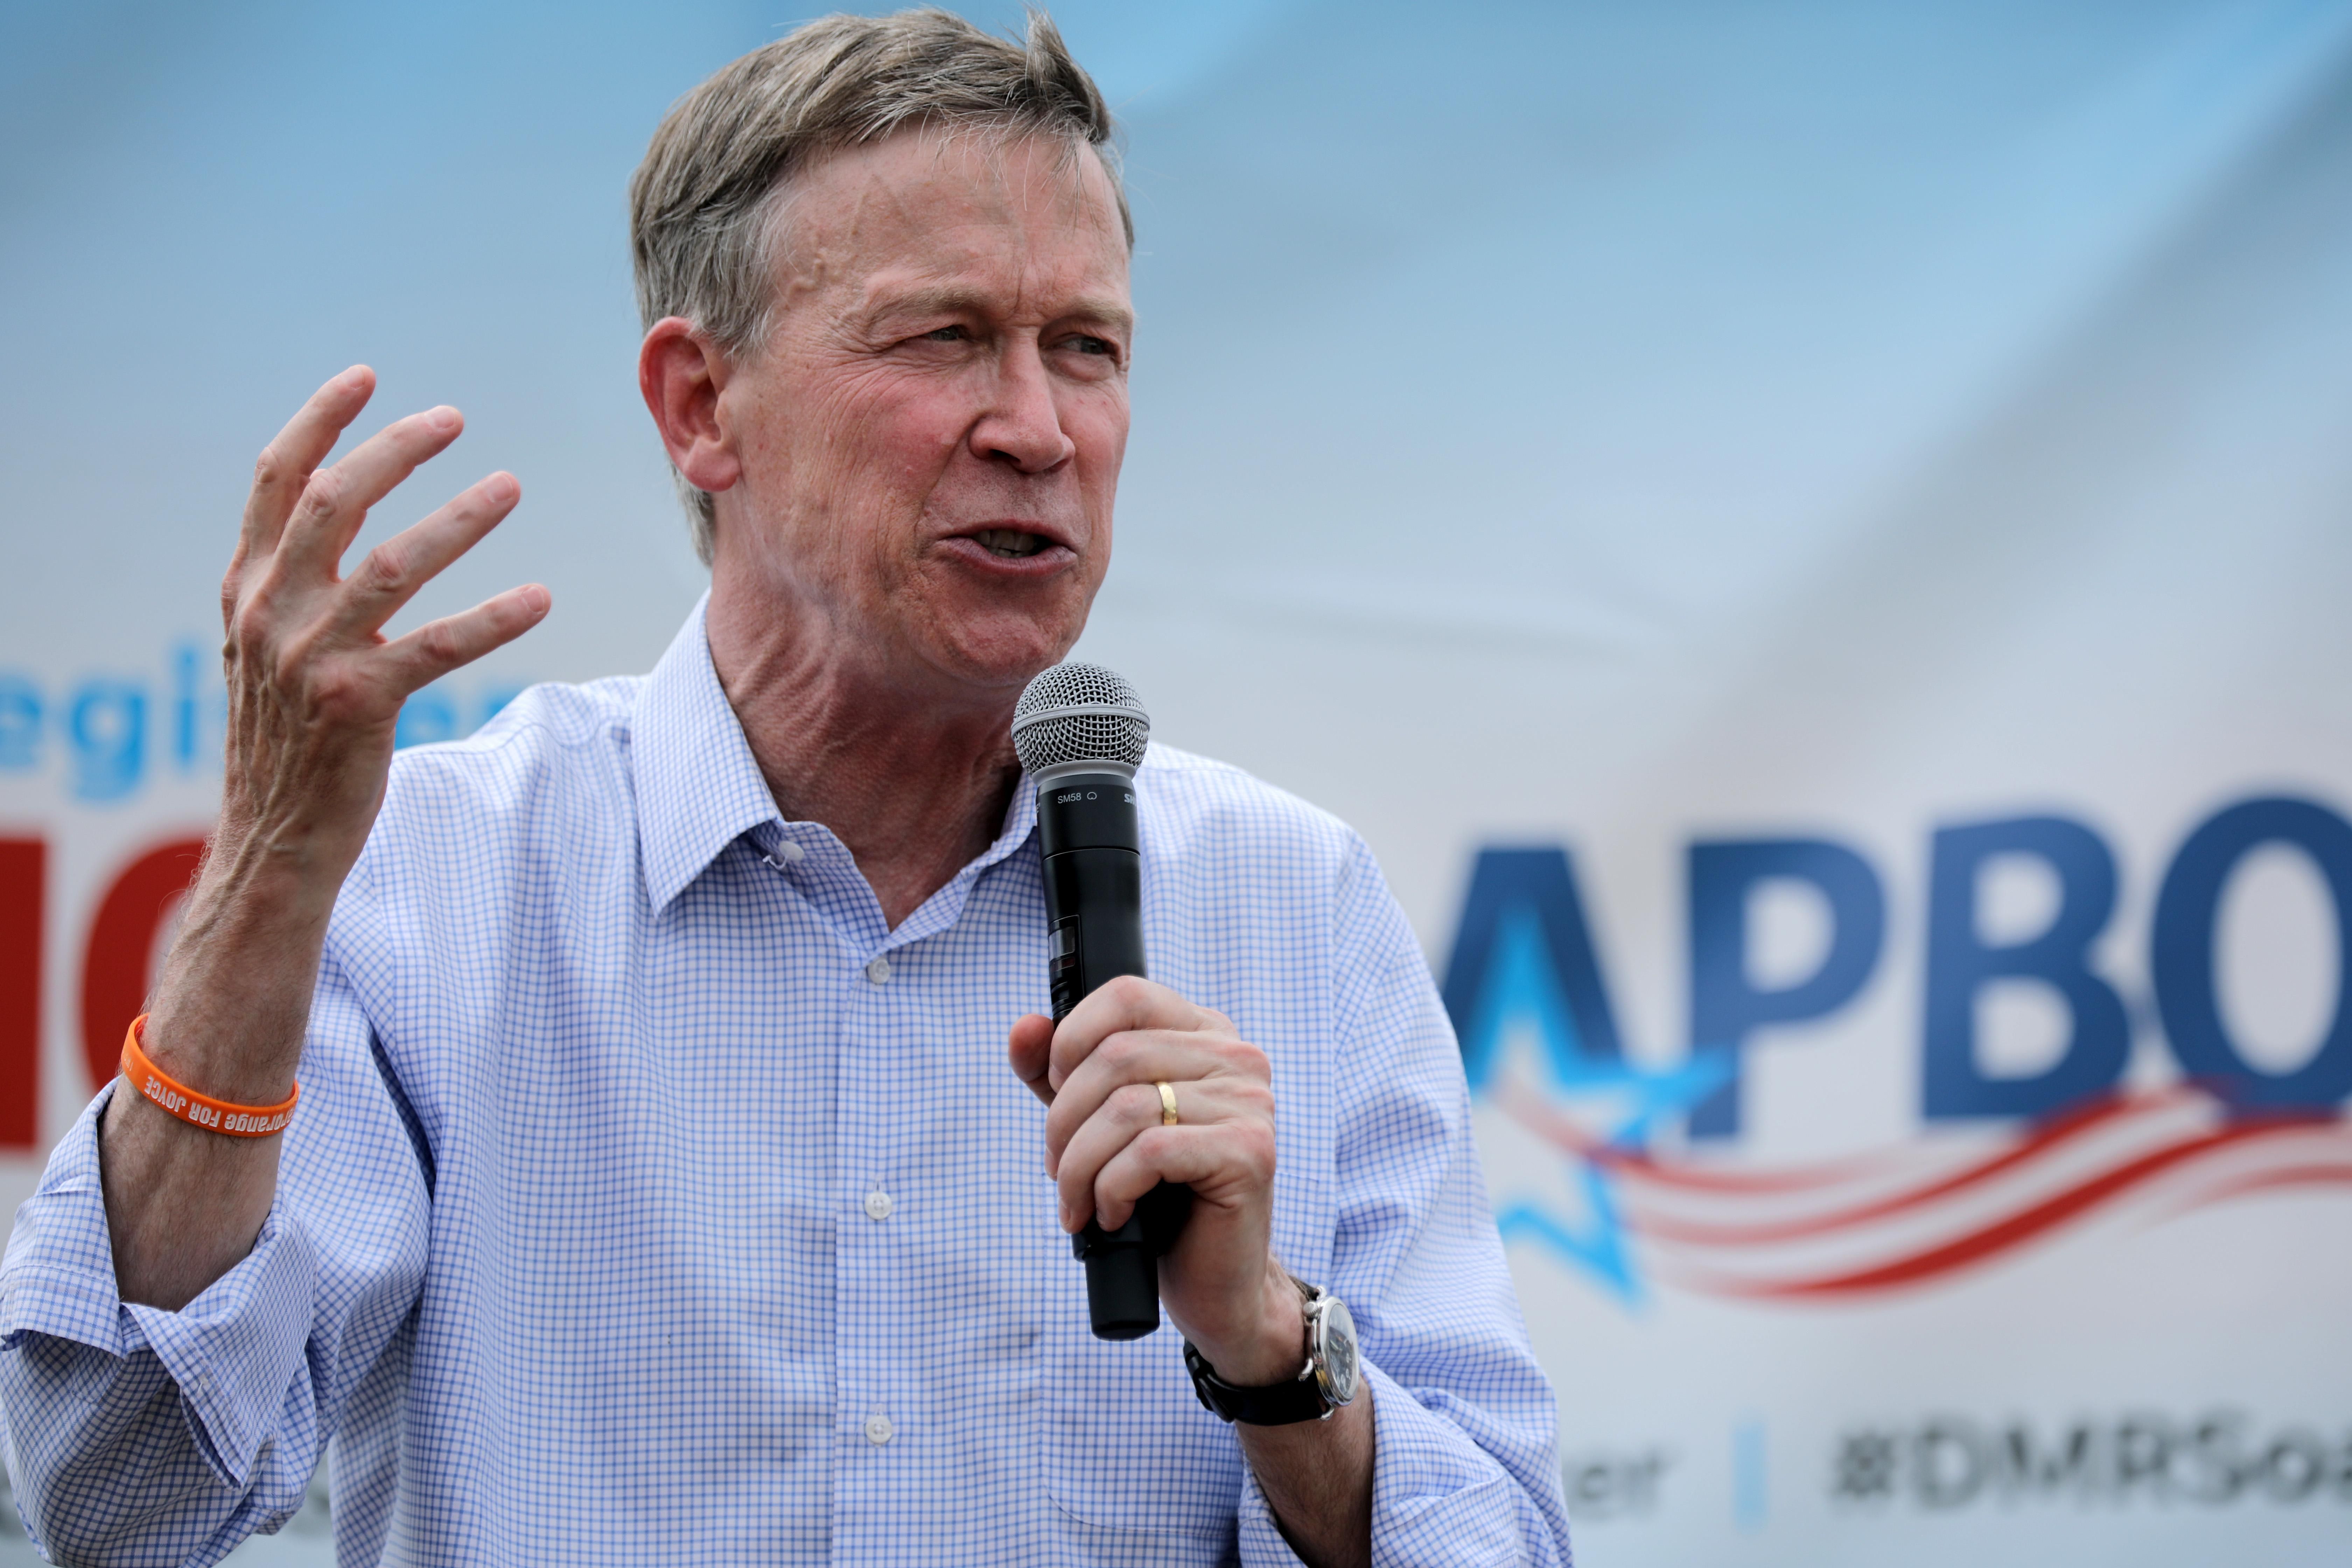 While governor, Hickenlooper famously ushered in the fracking revolution in Colorado, earning the nickname “Frackenlooper” while fossil fuel production in the state soared. (Photo by Chip Somodevilla/Getty Images)